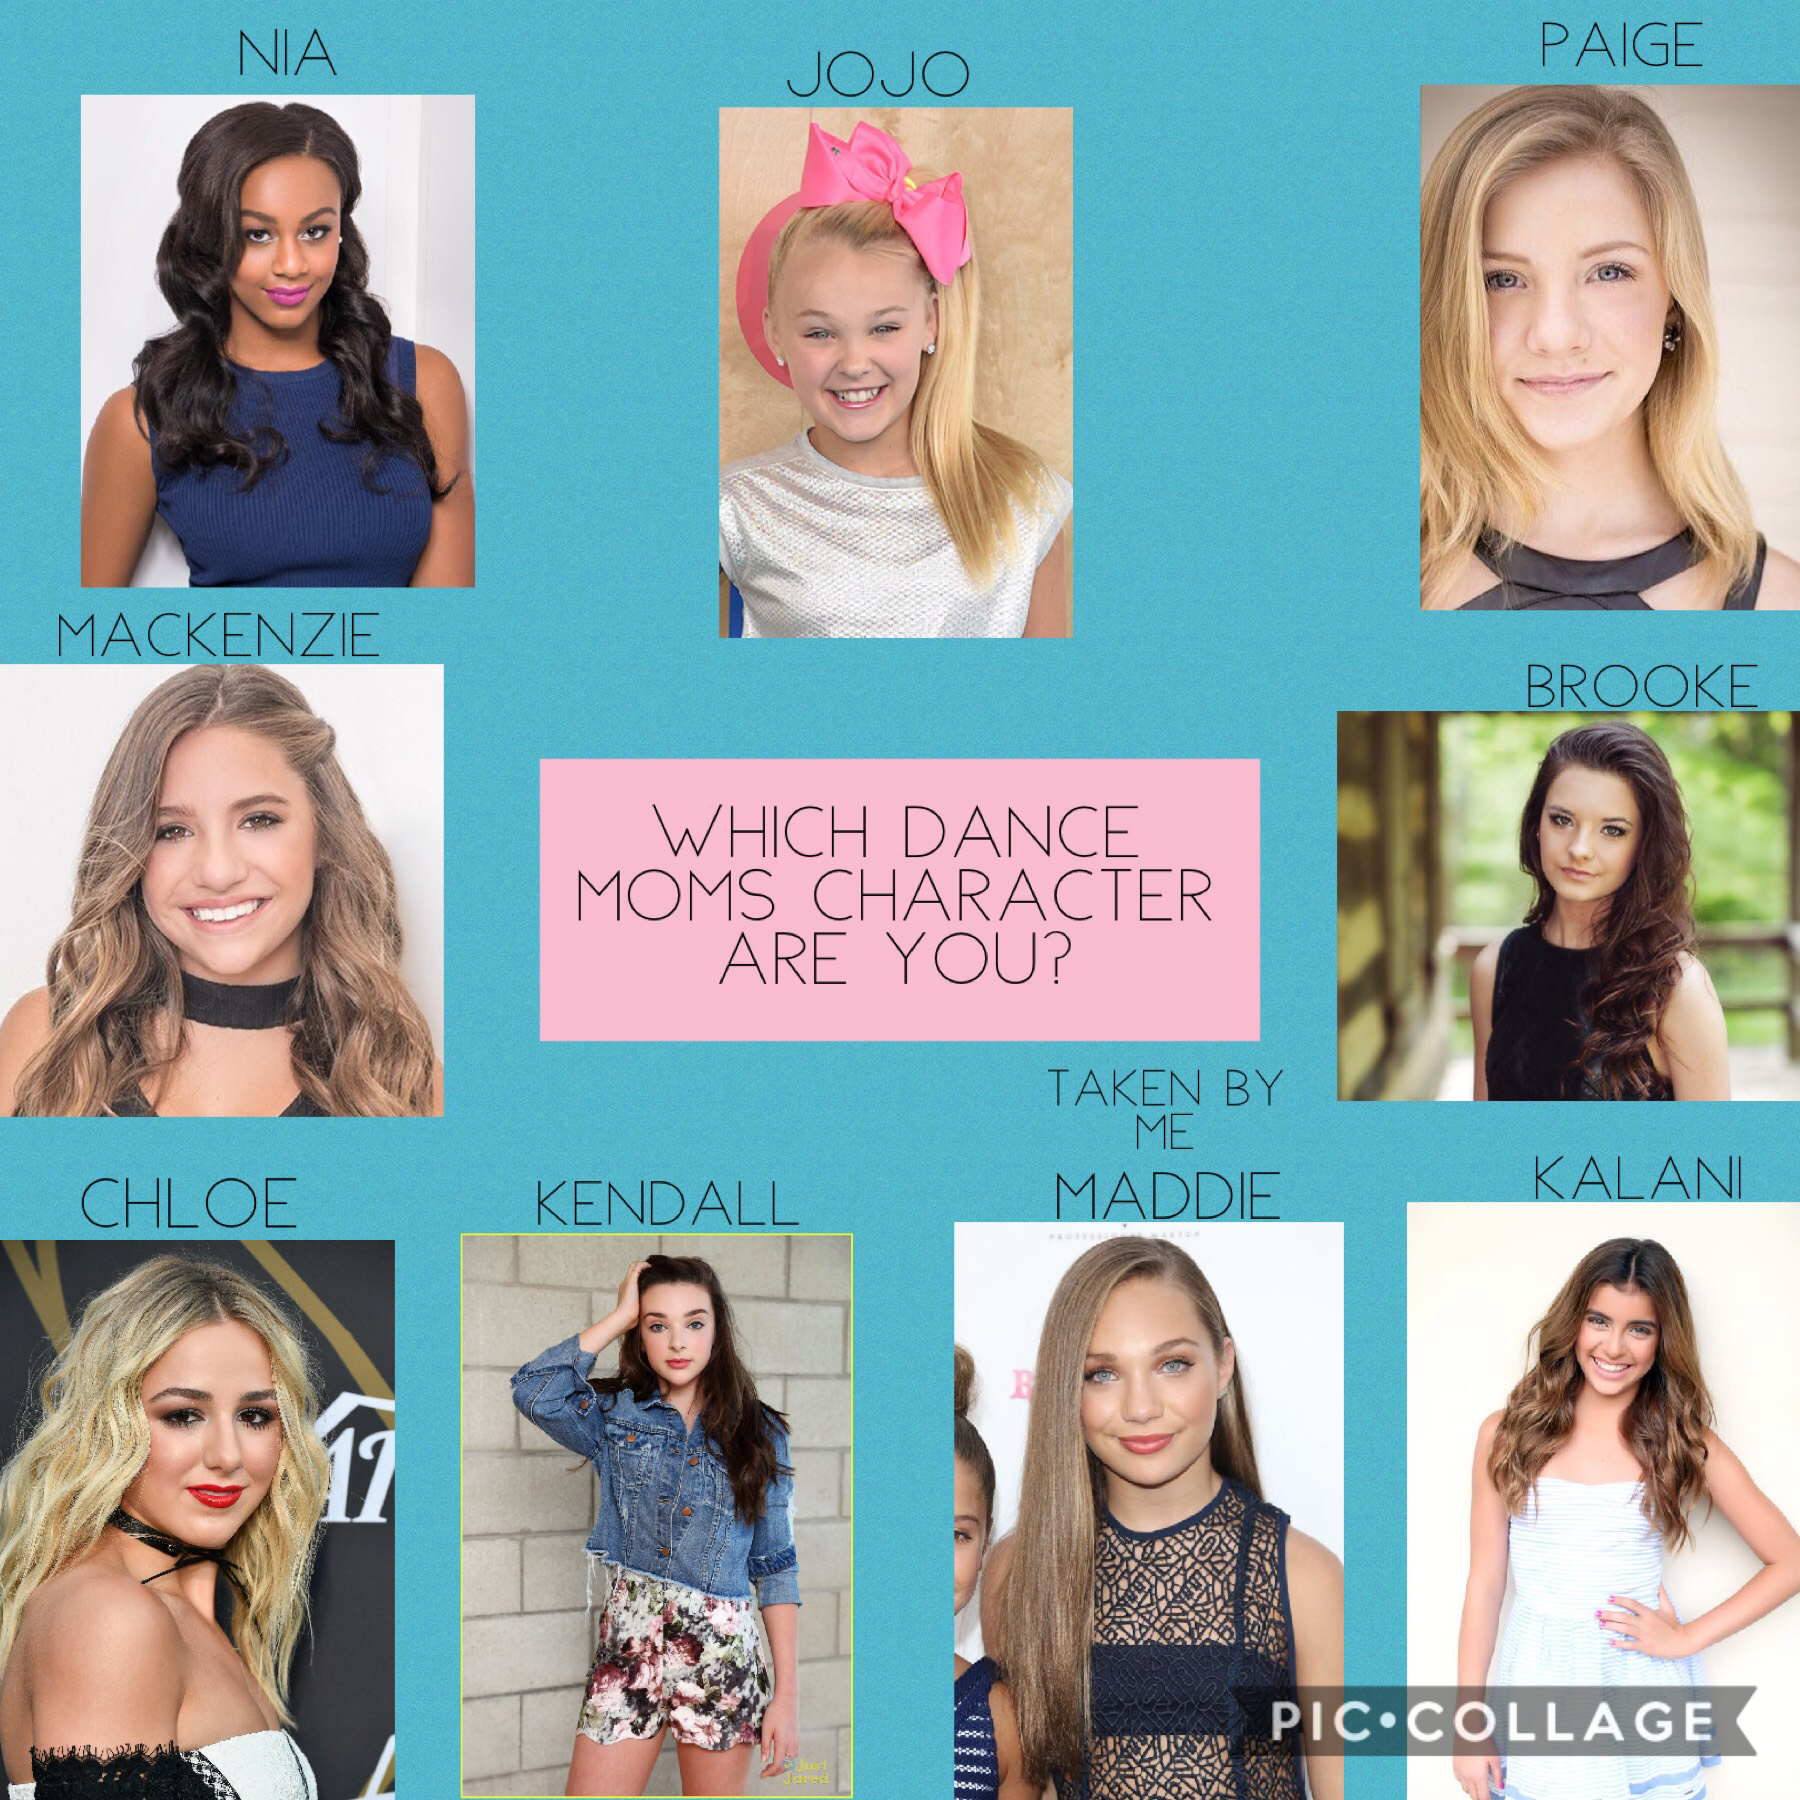 Hello guys! Comment which dancer you would like to be. I will put your username by the person you picked, and keep updating until full. Have a great day!